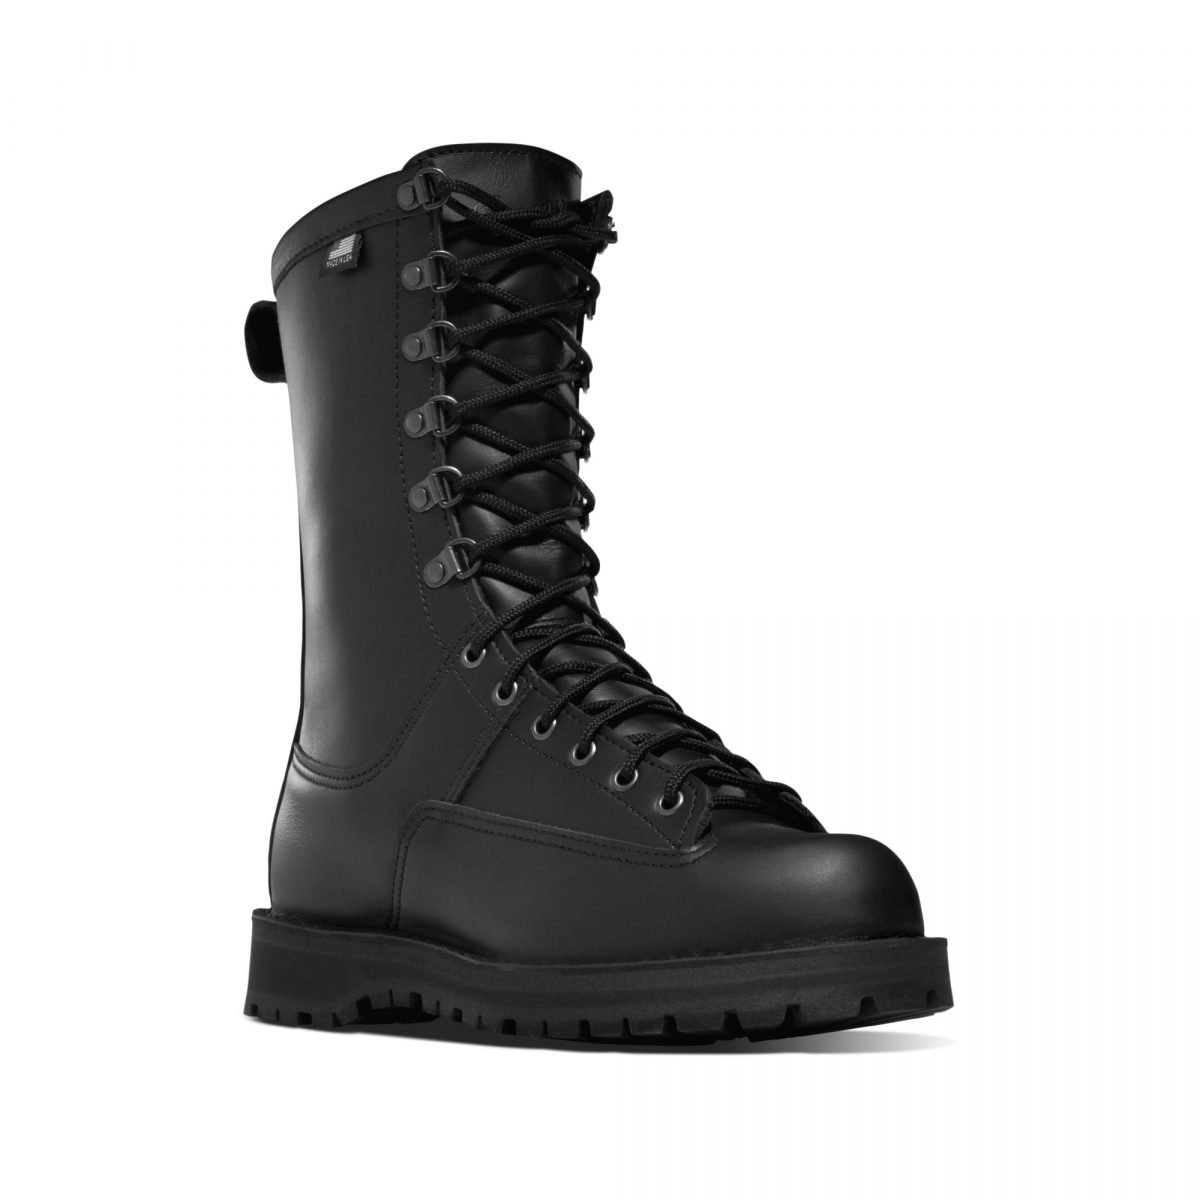 Fort Lewis Safety Work Boots